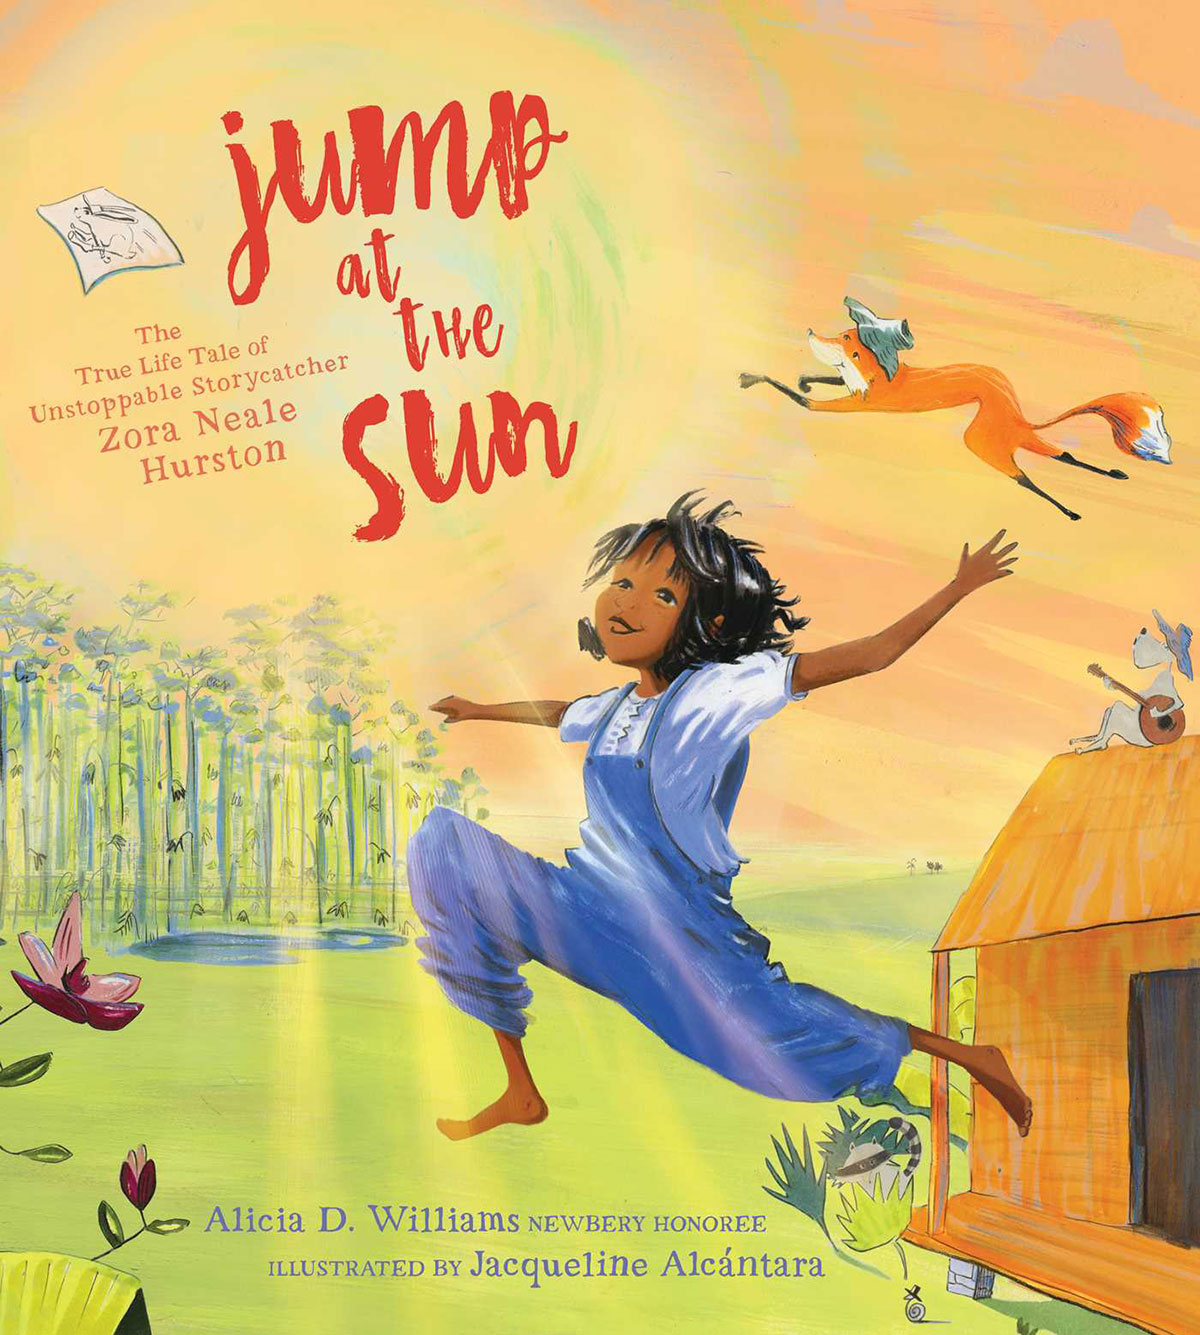 Jump at the Sun book cover Zora Neale Hurston as a young girl jumping outside